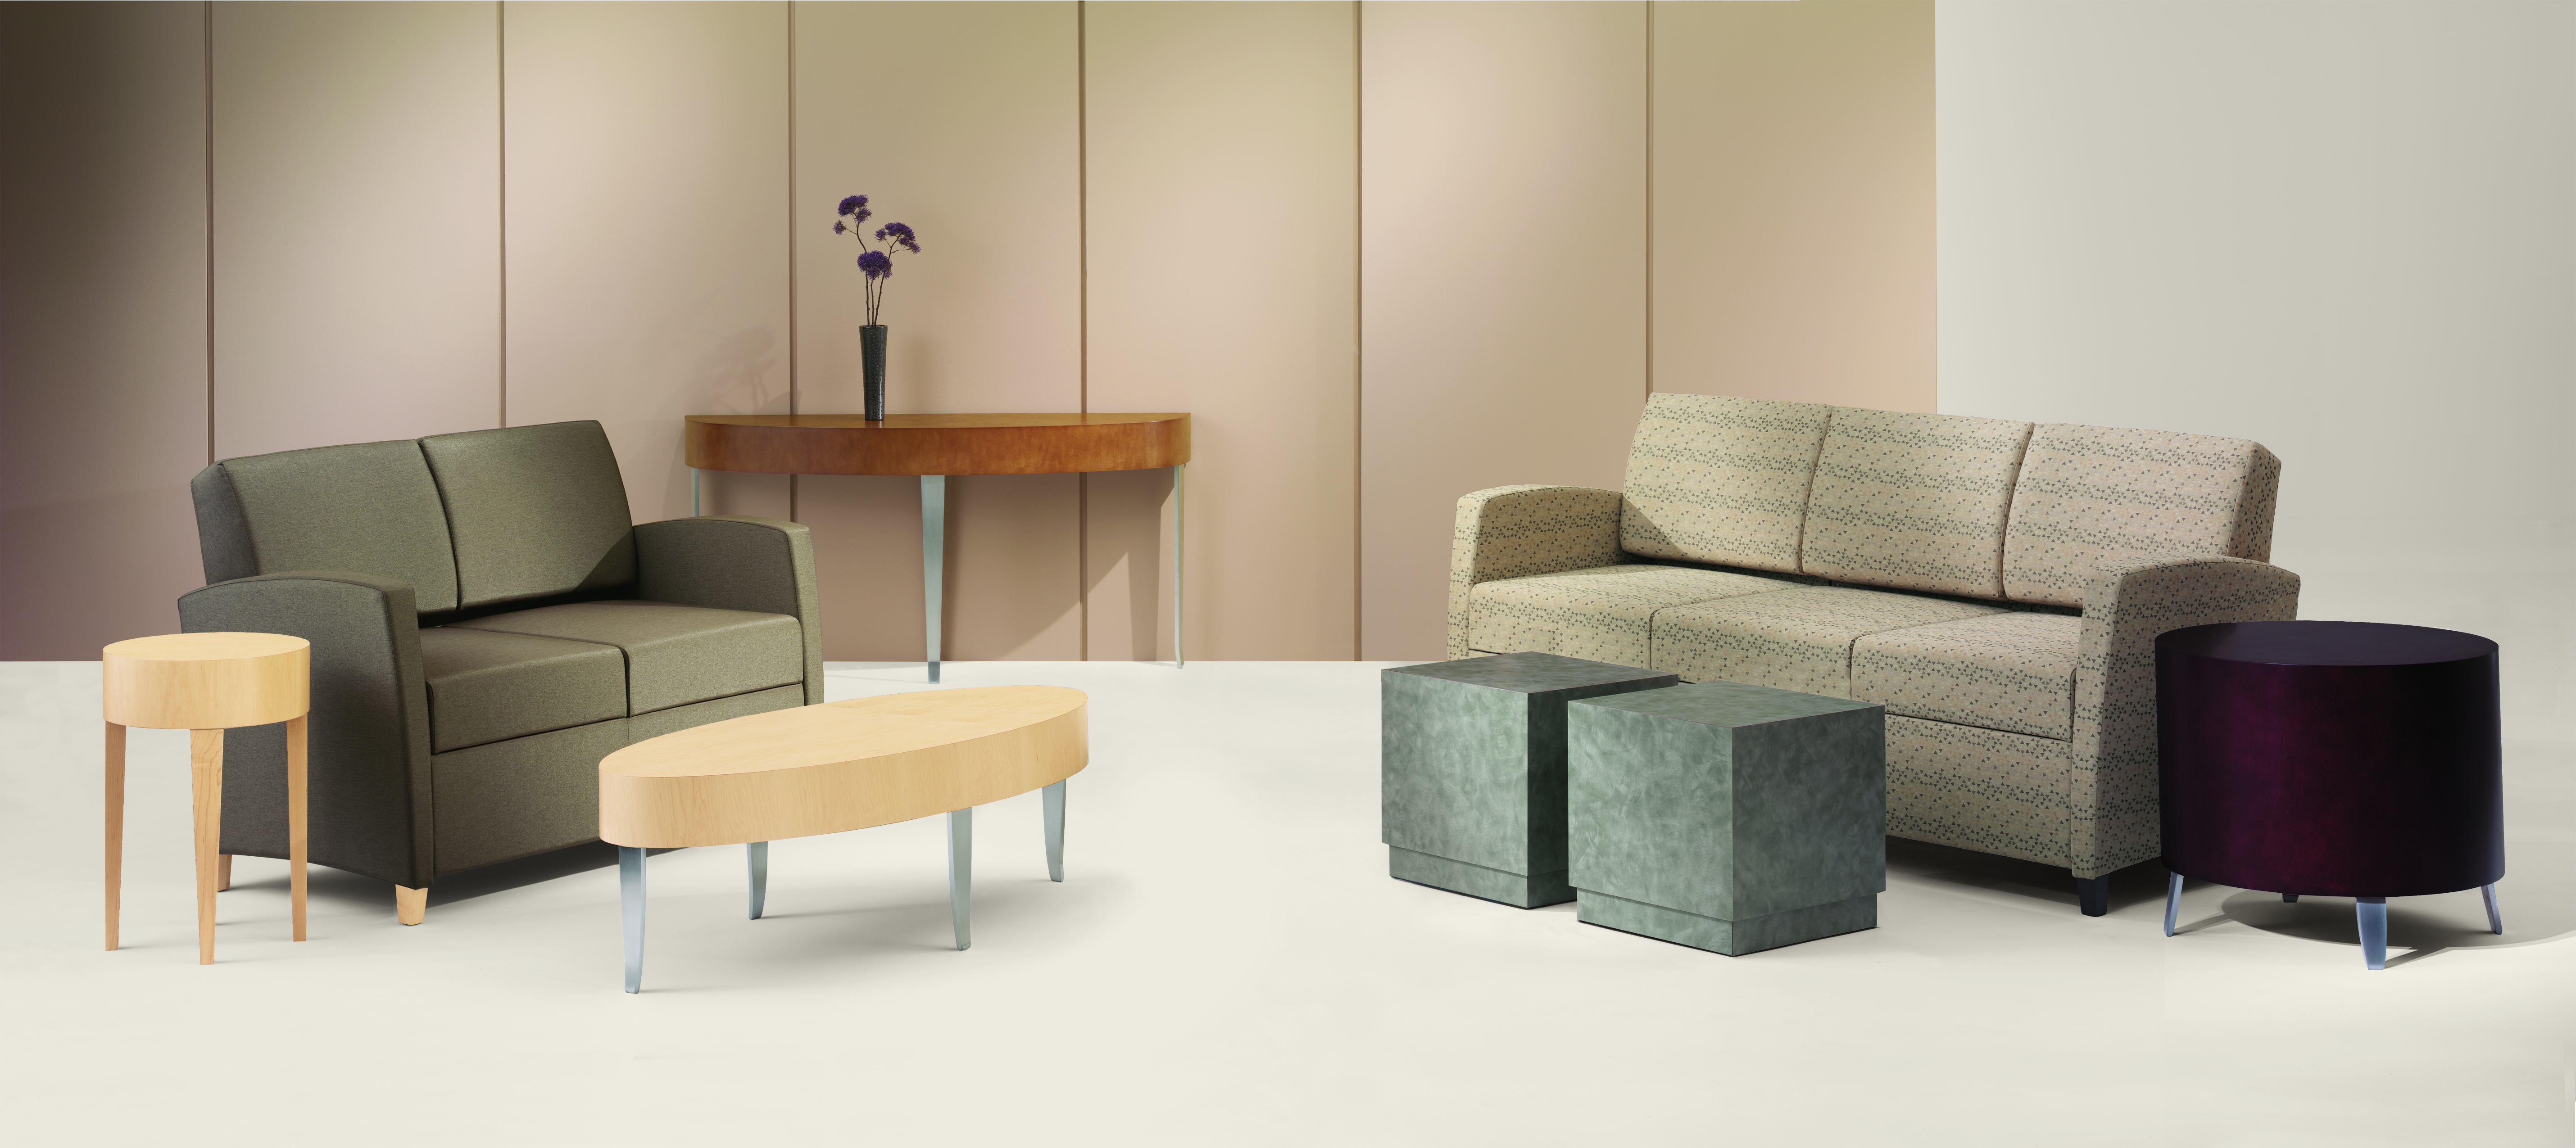 Tria Upholstered Arm Group with Tria Tables and Cube & Drum Tabless